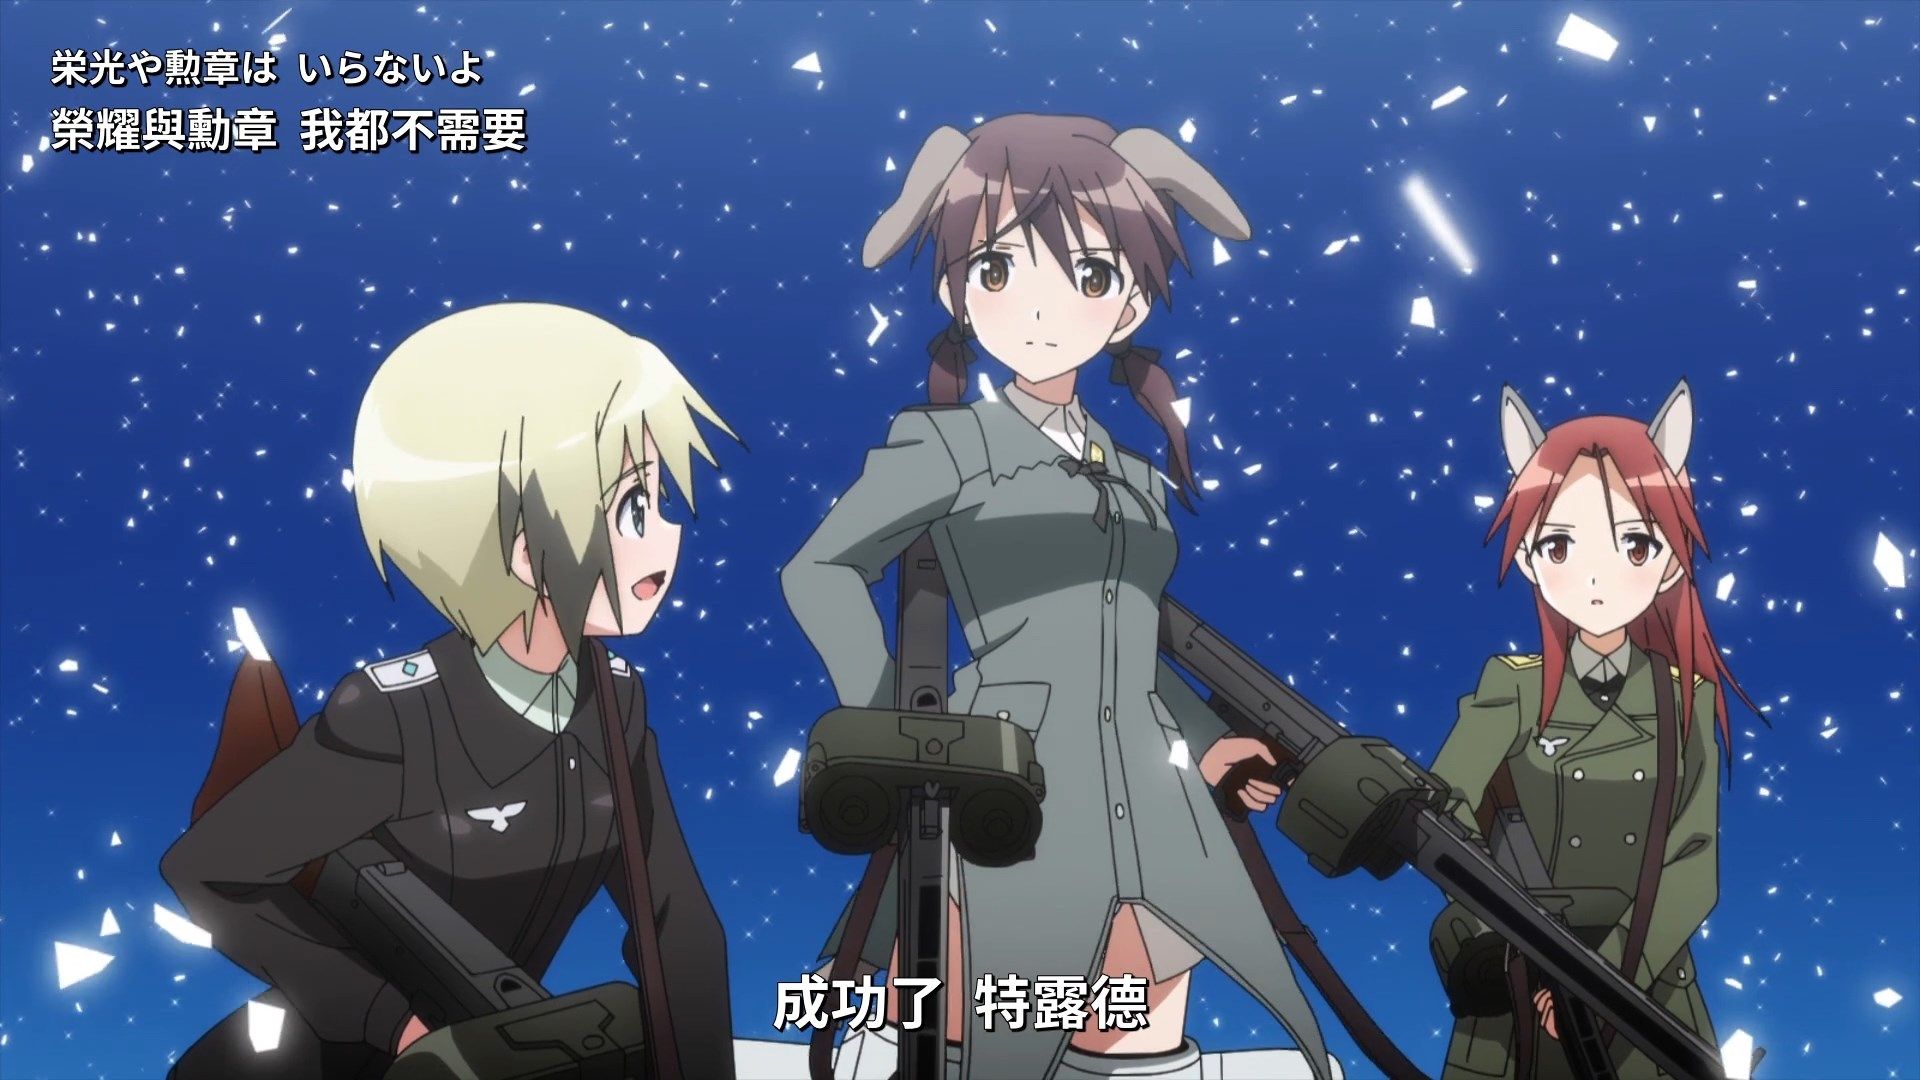 _Lilith_Raws_Strike_Witches_Road_to_Berlin_12_Baha_WEB_DL_1080p_AVC_AAC_CHT_MKV_.mkv_snapshot_21.45